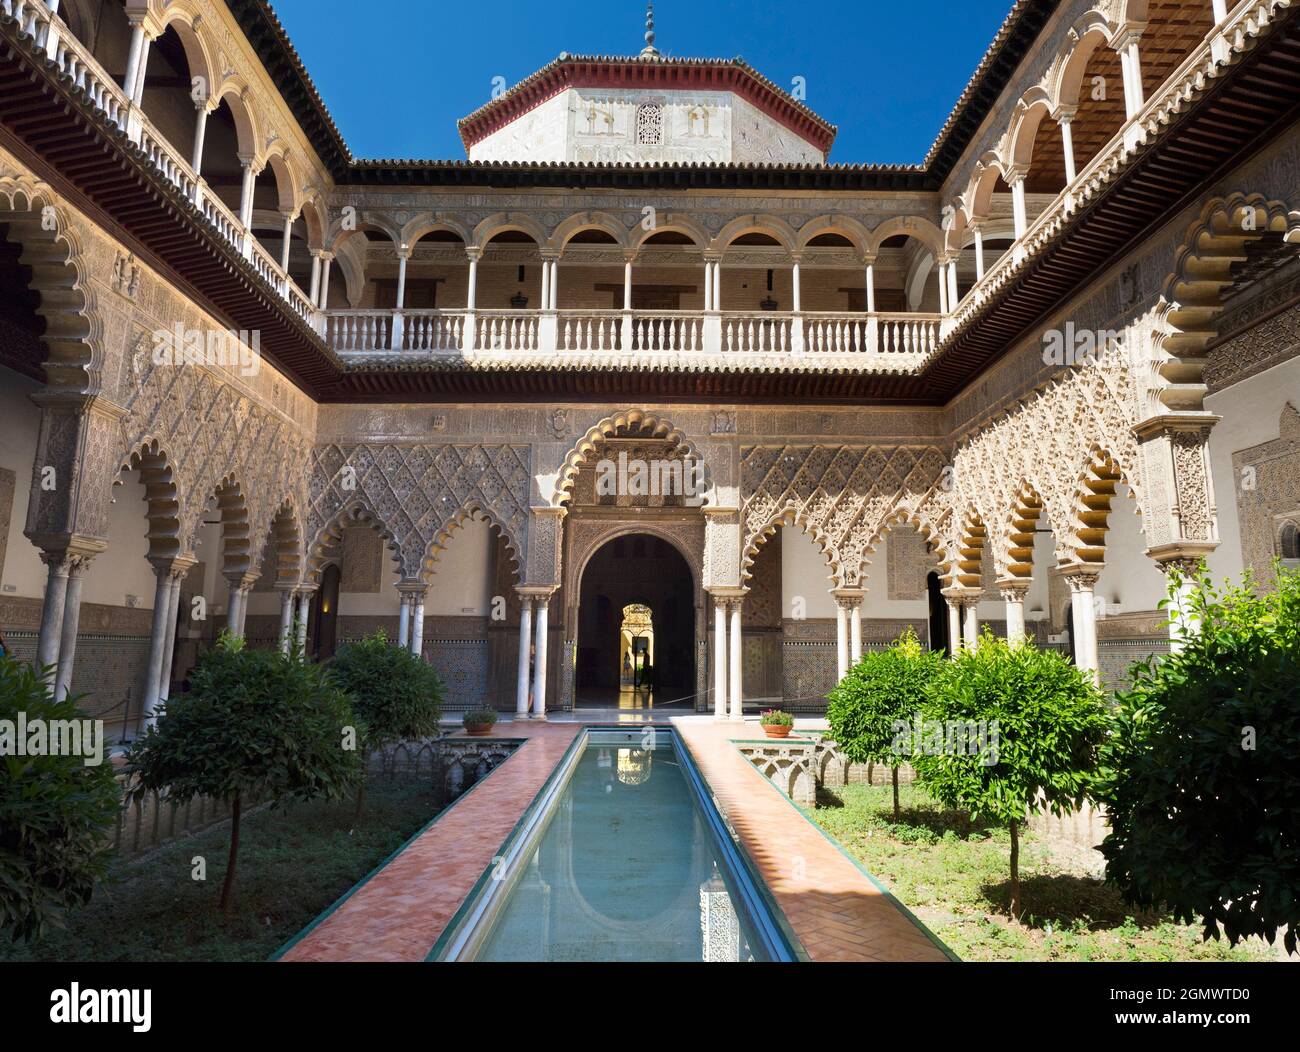 Seville, Spain - 18 July 2015; The Alcazar of Seville, Spain, is a beautiful and historic royal palace that was originally built by Moorish Kings in t Stock Photo